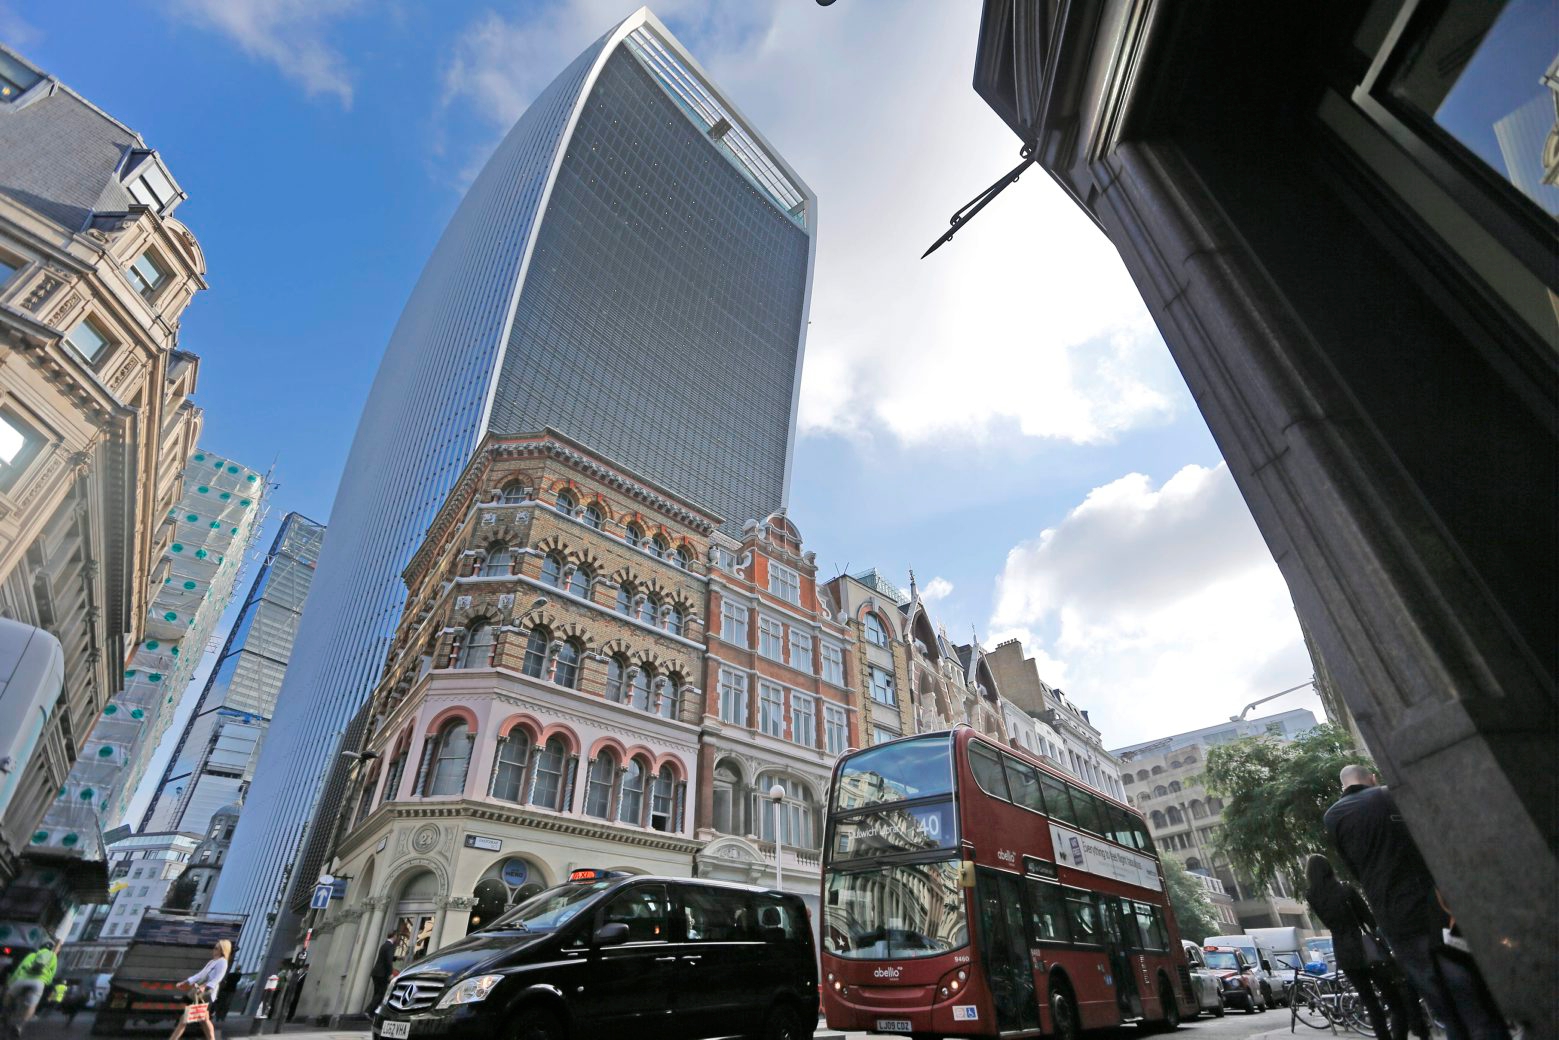 London's Walkie Talkie building, center rear, was judged UK's worst building in London, Wednesday, Sept. 2, 2015. A City of London skyscraper, nicknamed the Walkie Talkie, has won the annual Carbuncle Cup, awarded to a building judged to be the UK's worst. In its short history, the 37-storey office tower has melted parked cars and critics have compared its three-storey roof garden to an airport terminal. (AP Photo/Frank Augstein) BRITAIN WORST BUILDING